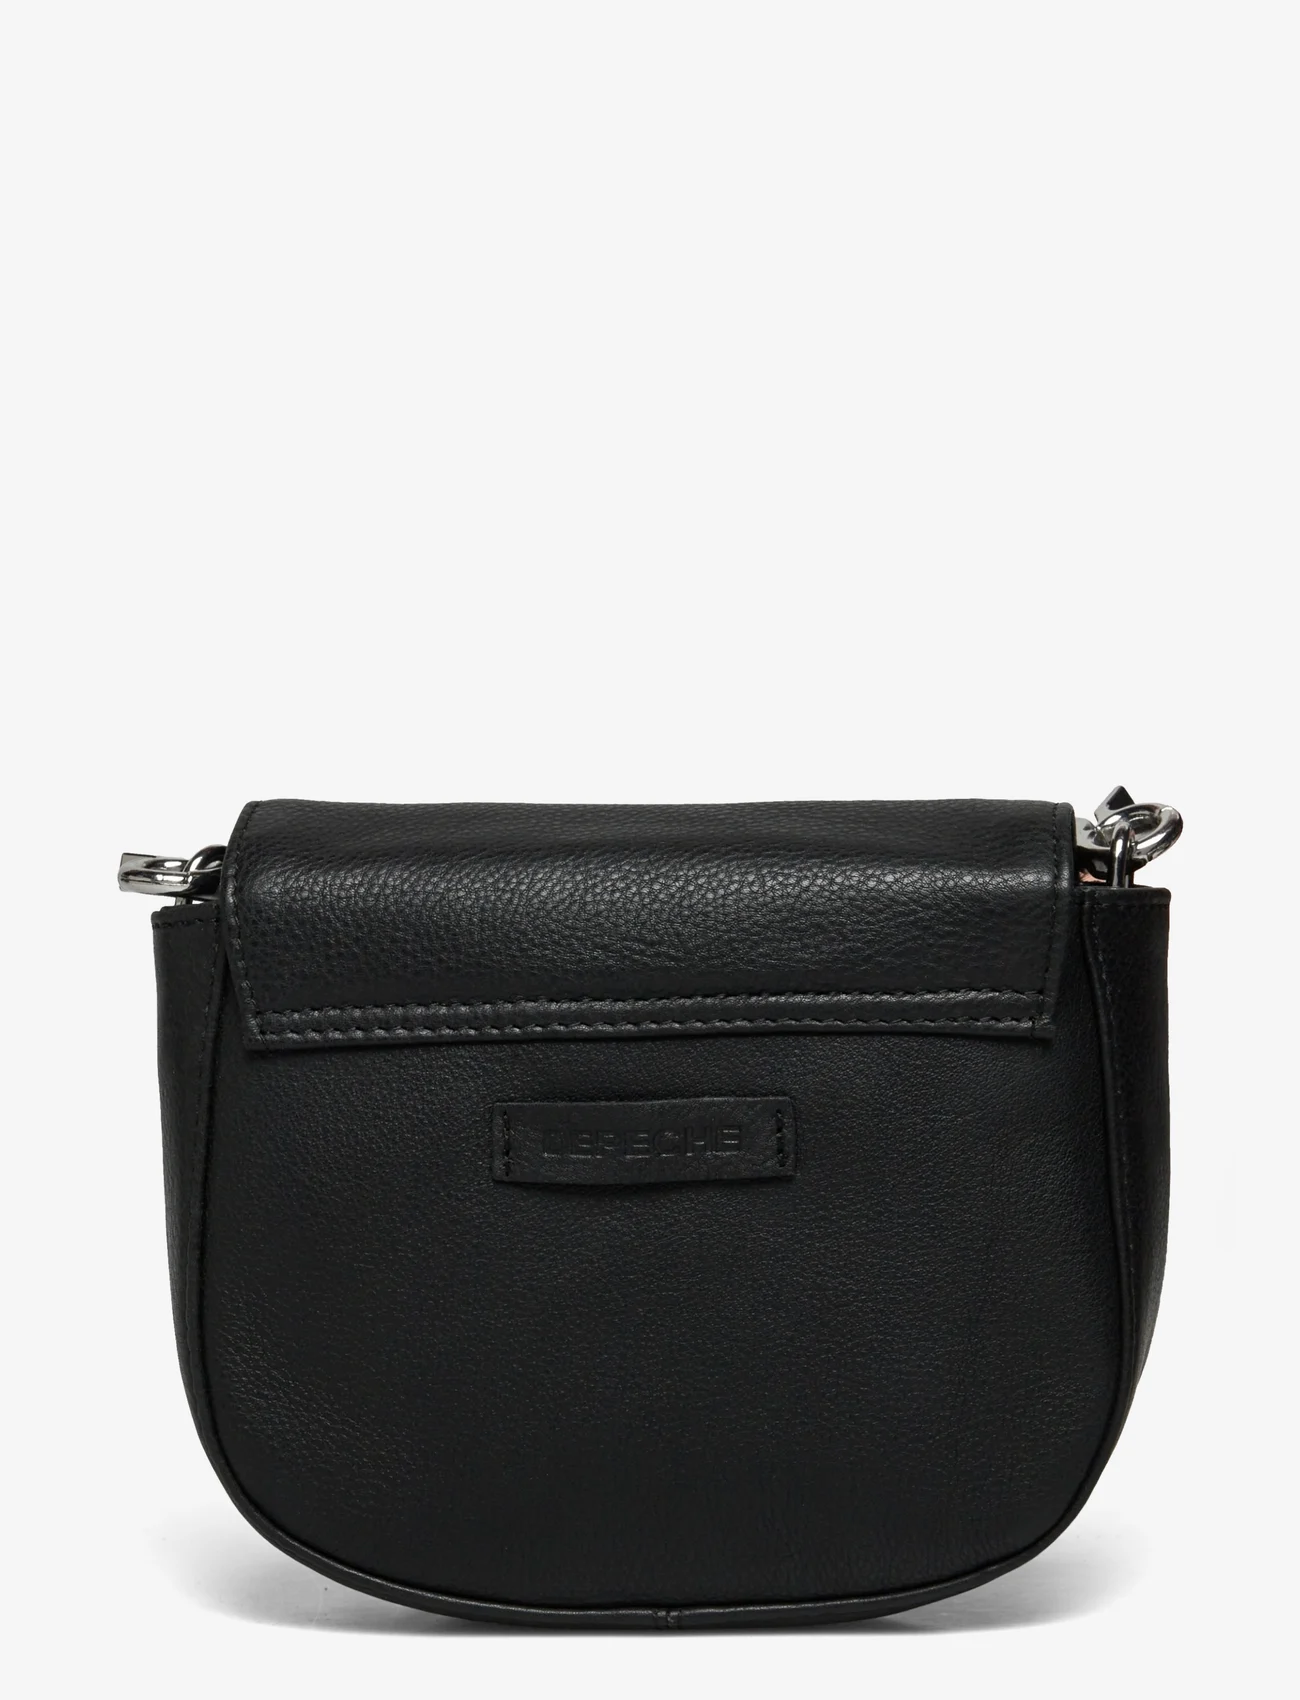 DEPECHE - Small bag / Clutch - party wear at outlet prices - 099 black (nero) - 1